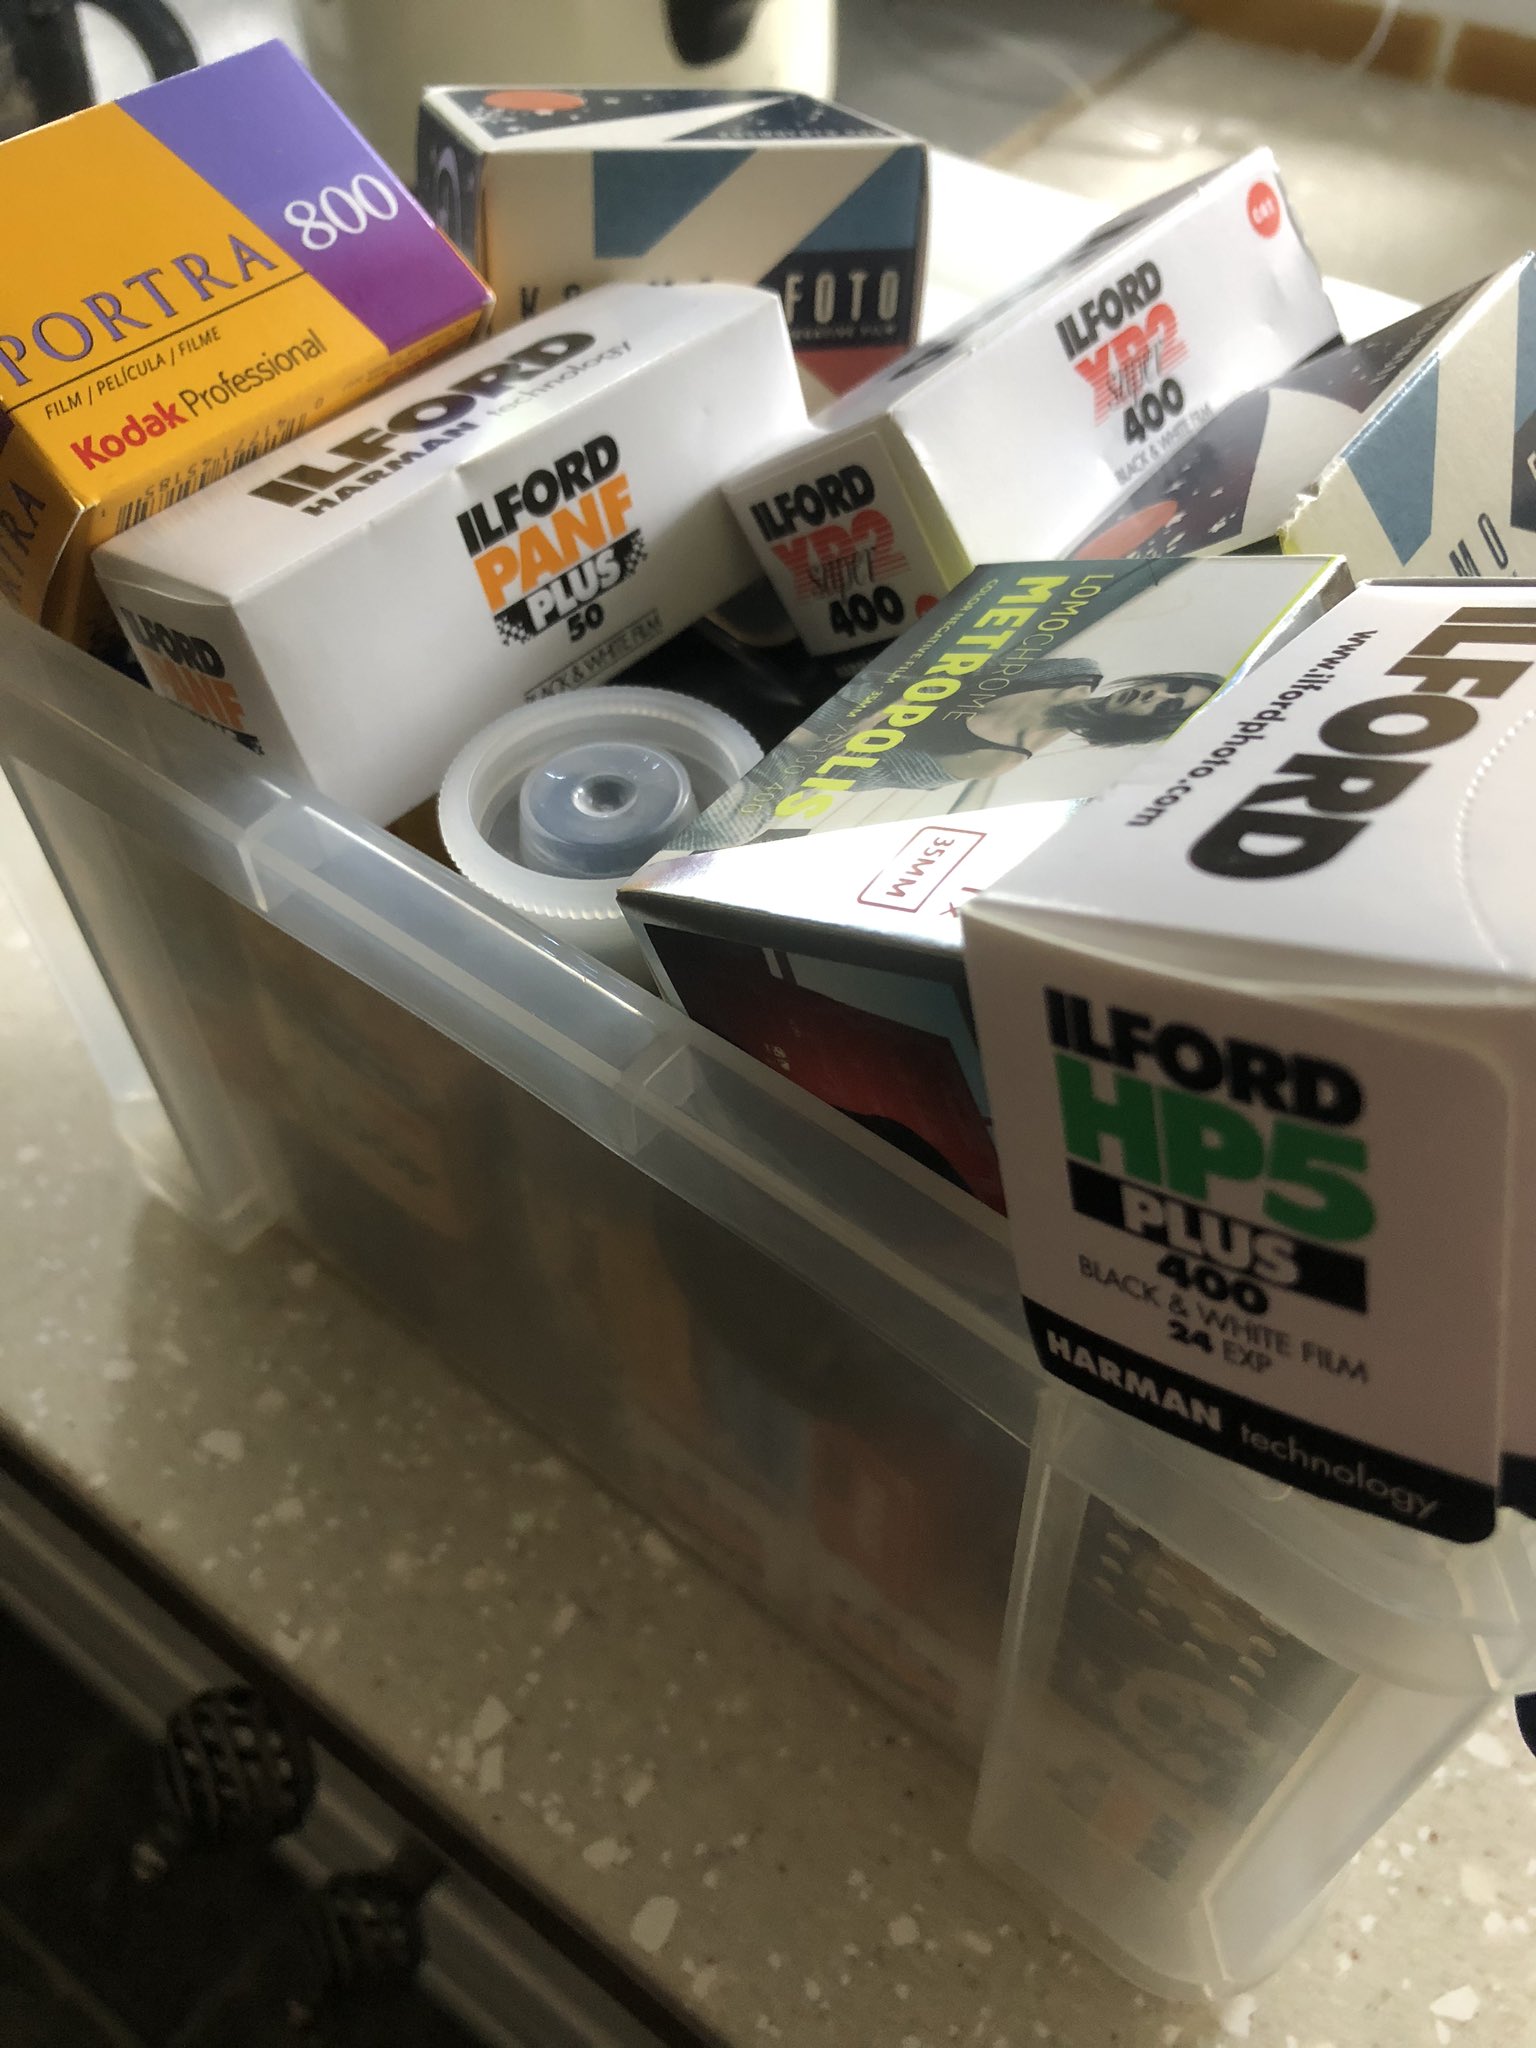 @aitchclarke Replying to @ILFORDPhoto Here’s my stash box of roll film! There’s also a Polaroid box and a pack film box Smiling face with smiling eyes #ilfordphoto #fridayfavourites #filmrollsnotloorolls